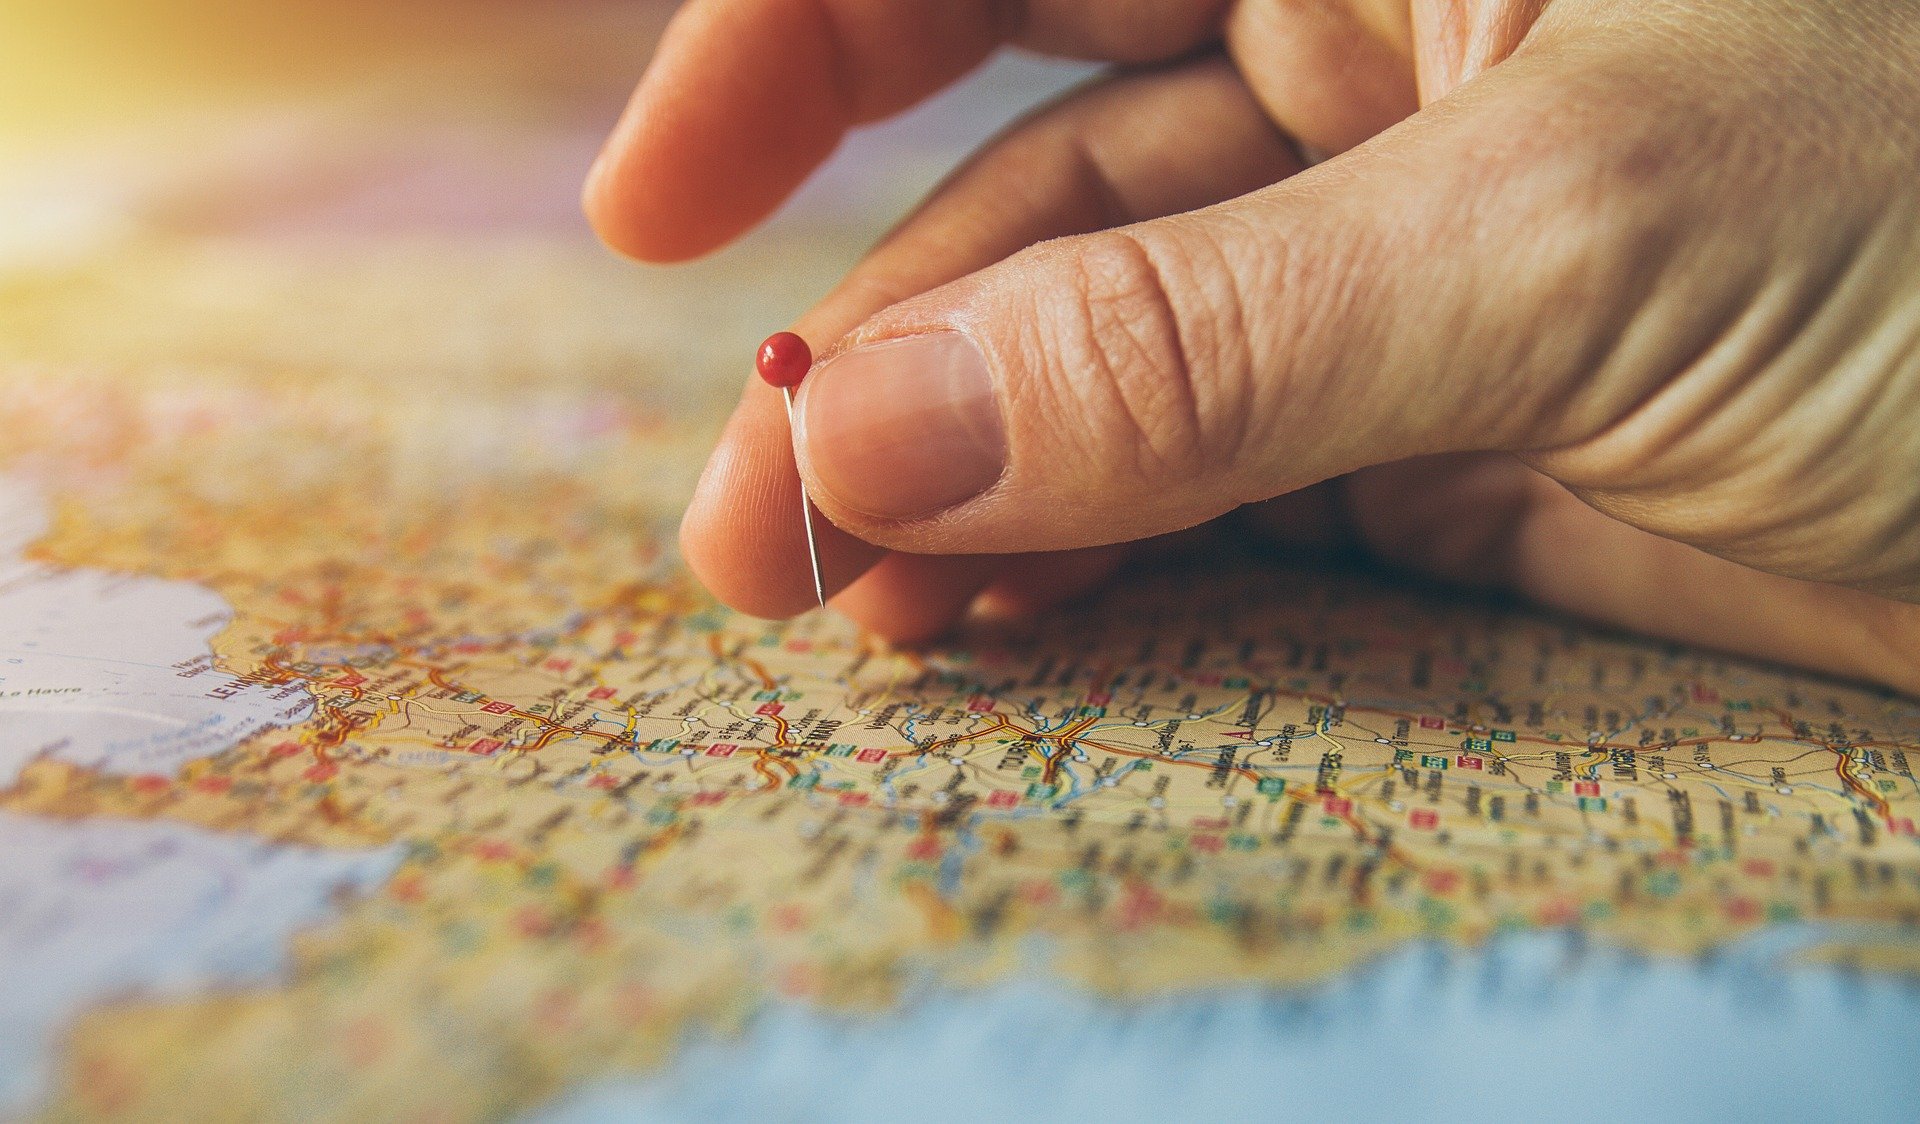 A hand holding a pin, hovering above a map (Image by piviso from Pixabey)